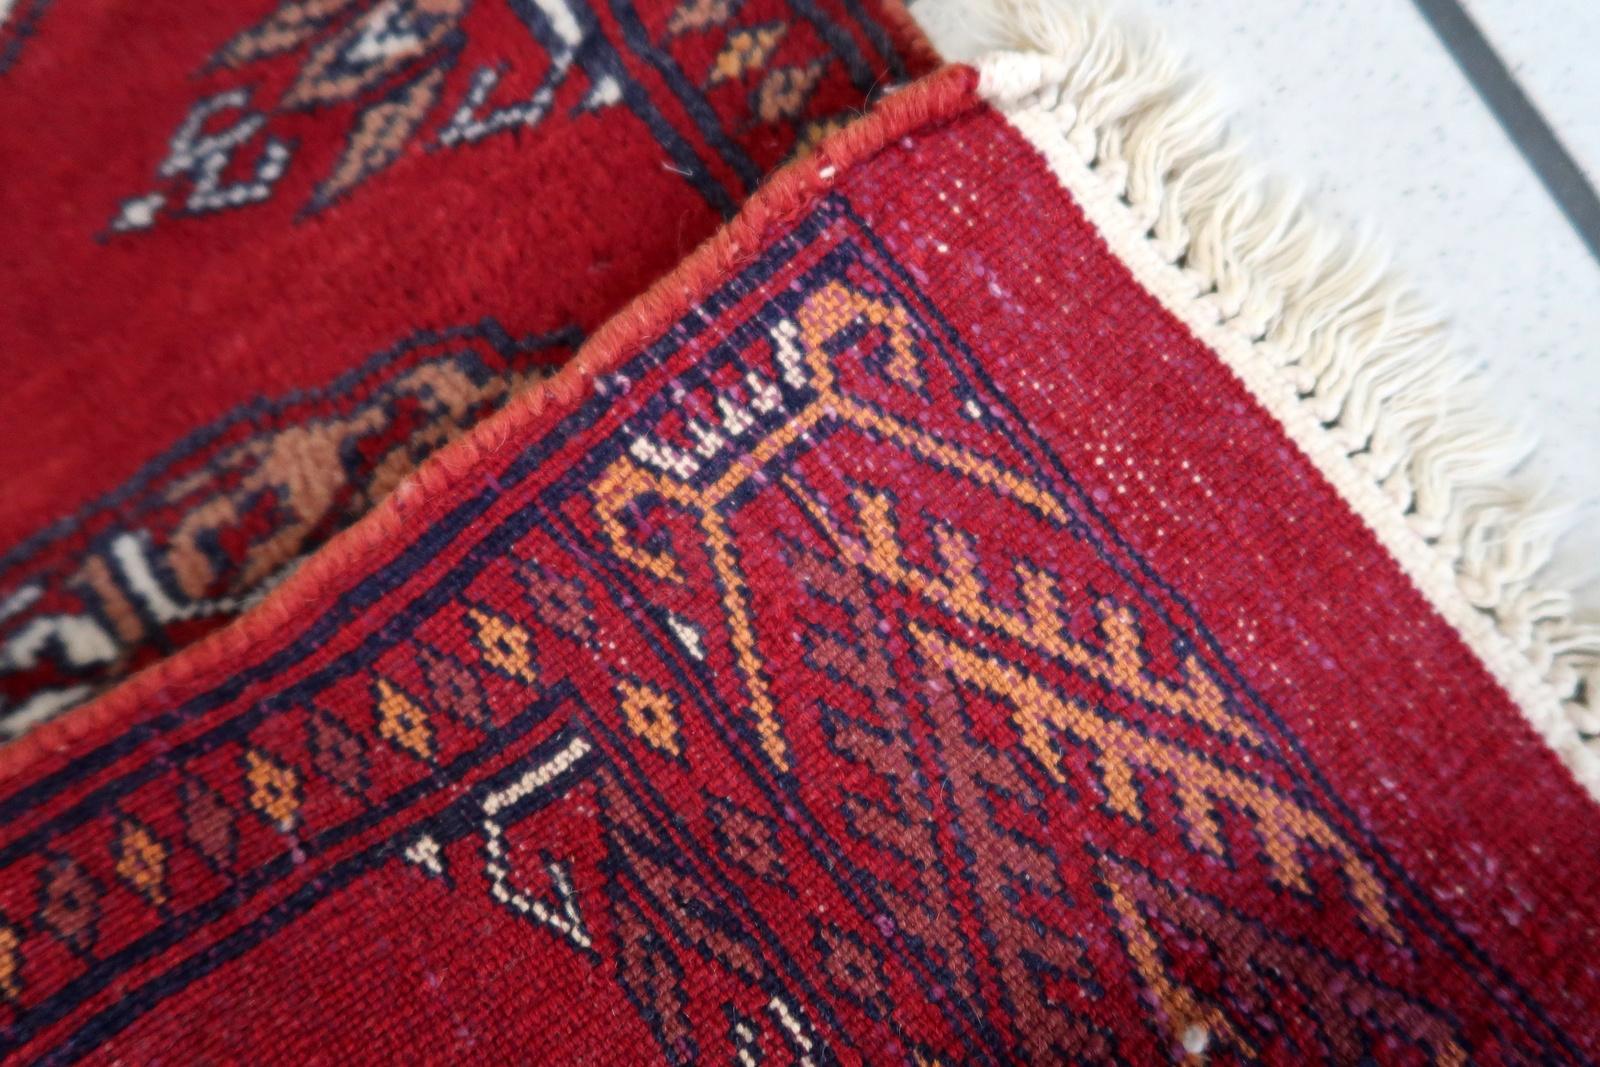 Handmade Vintage Uzbek Bukhara Rug is a remarkable piece crafted in the 1960s. Measuring 1’ x 3.9’ (32cm x 120cm), it boasts intricate craftsmanship and a captivating design. Here’s a detailed description based on the image:

Colors:
The primary